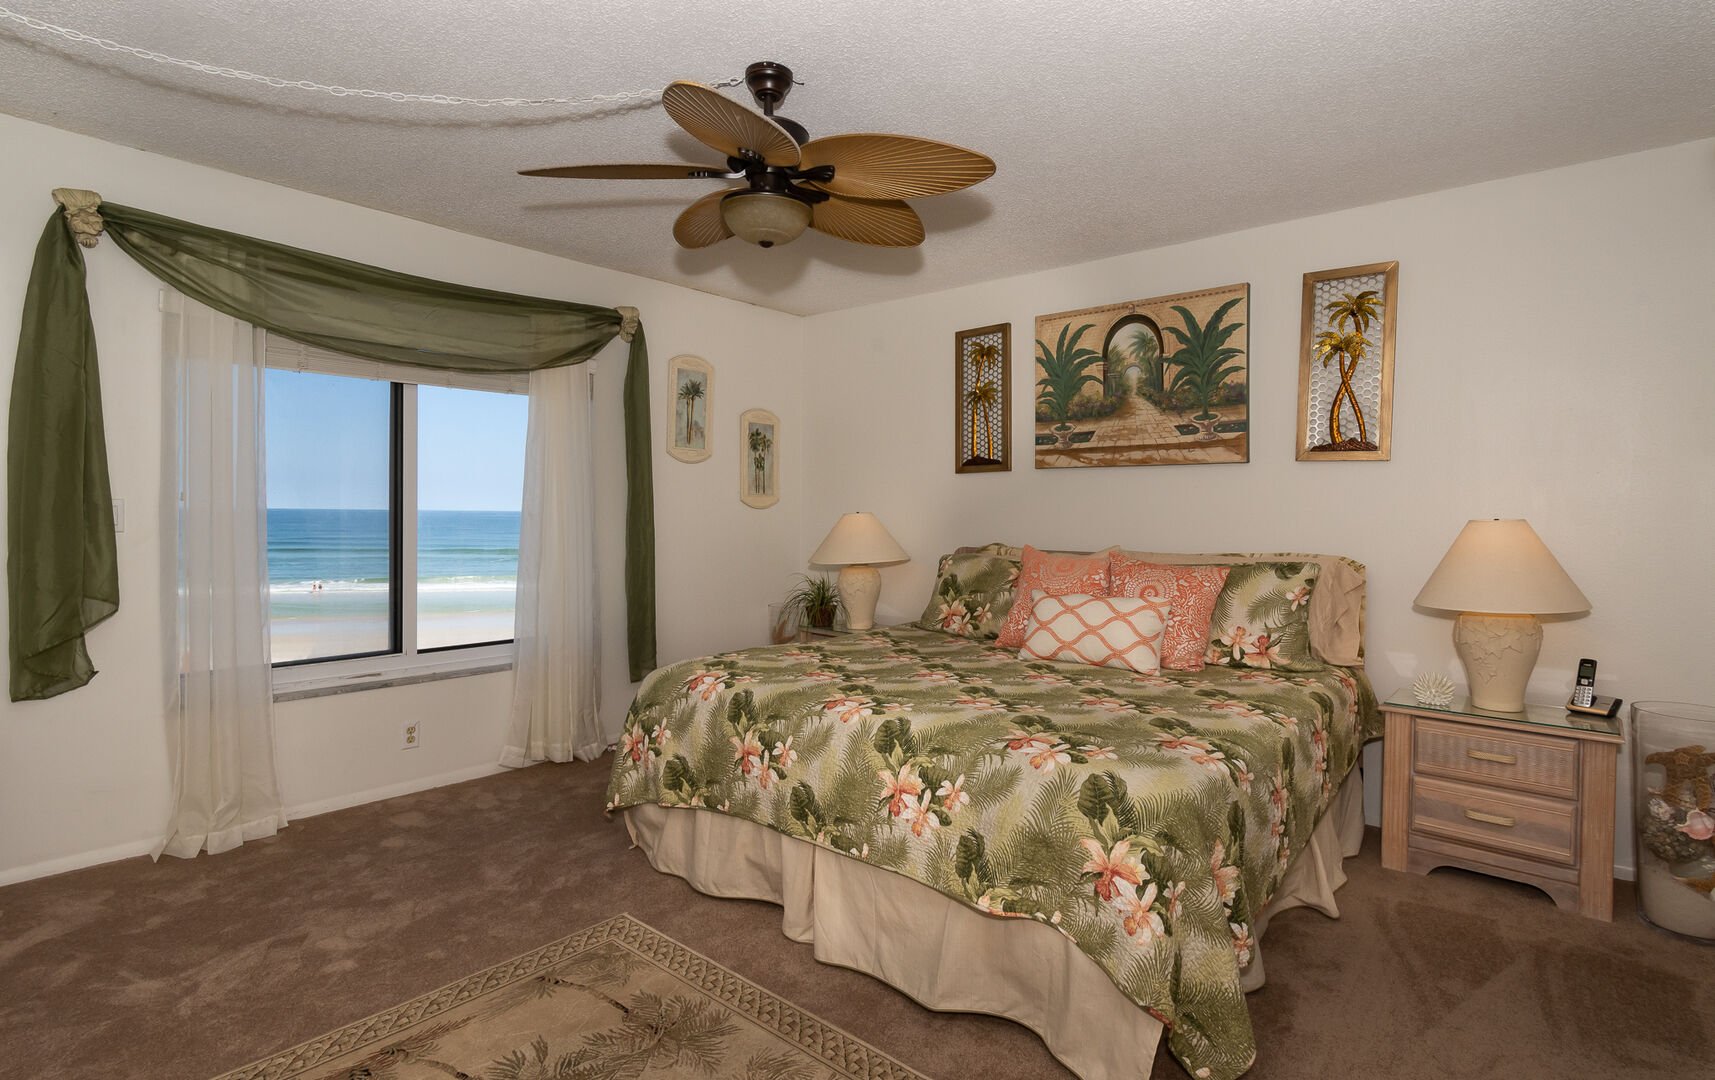 Spacious, oceanfront master bedroom with king size bed, flat screen TV and private bath.